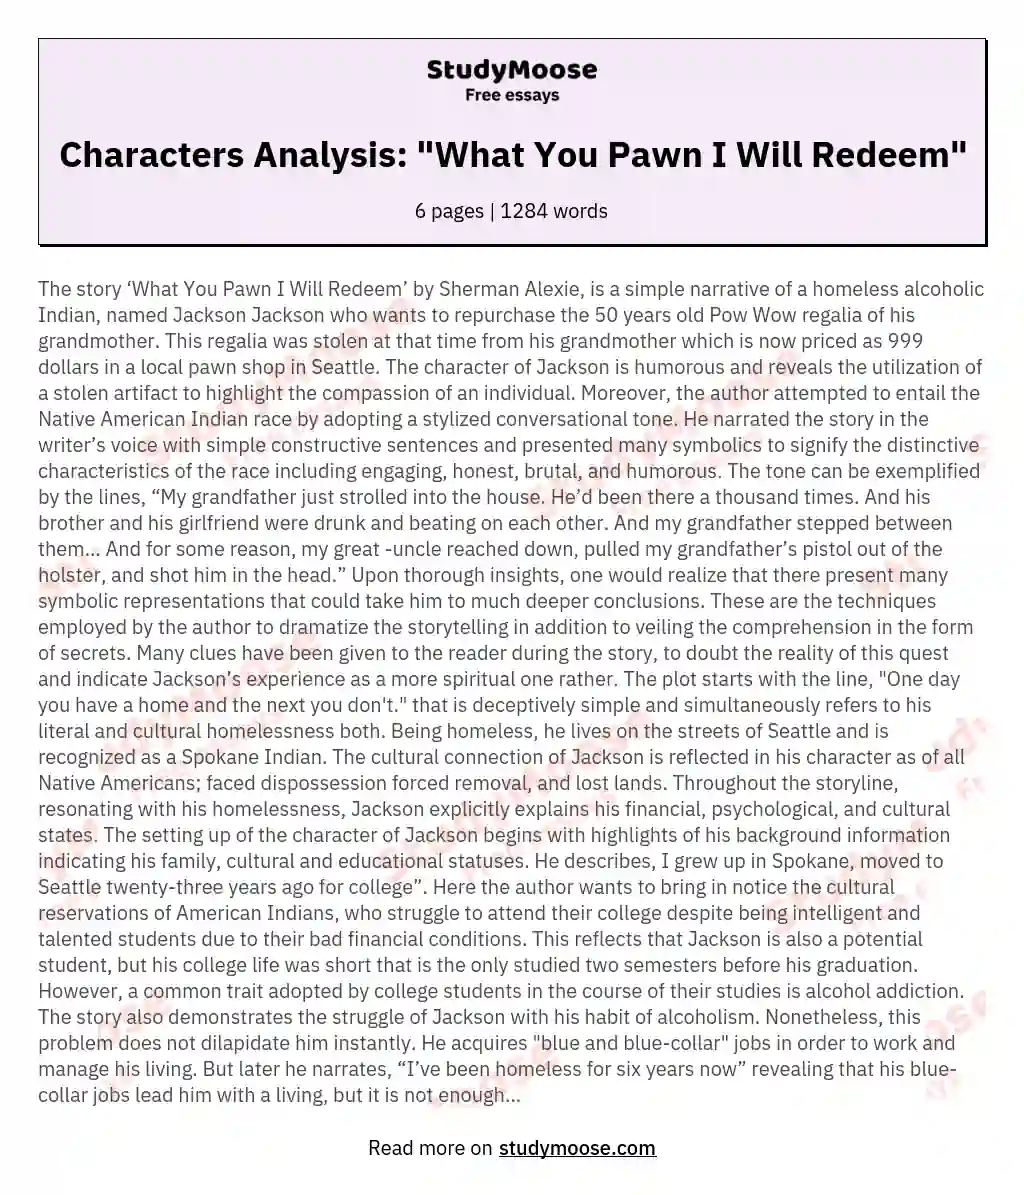 Characters Analysis: "What You Pawn I Will Redeem" essay